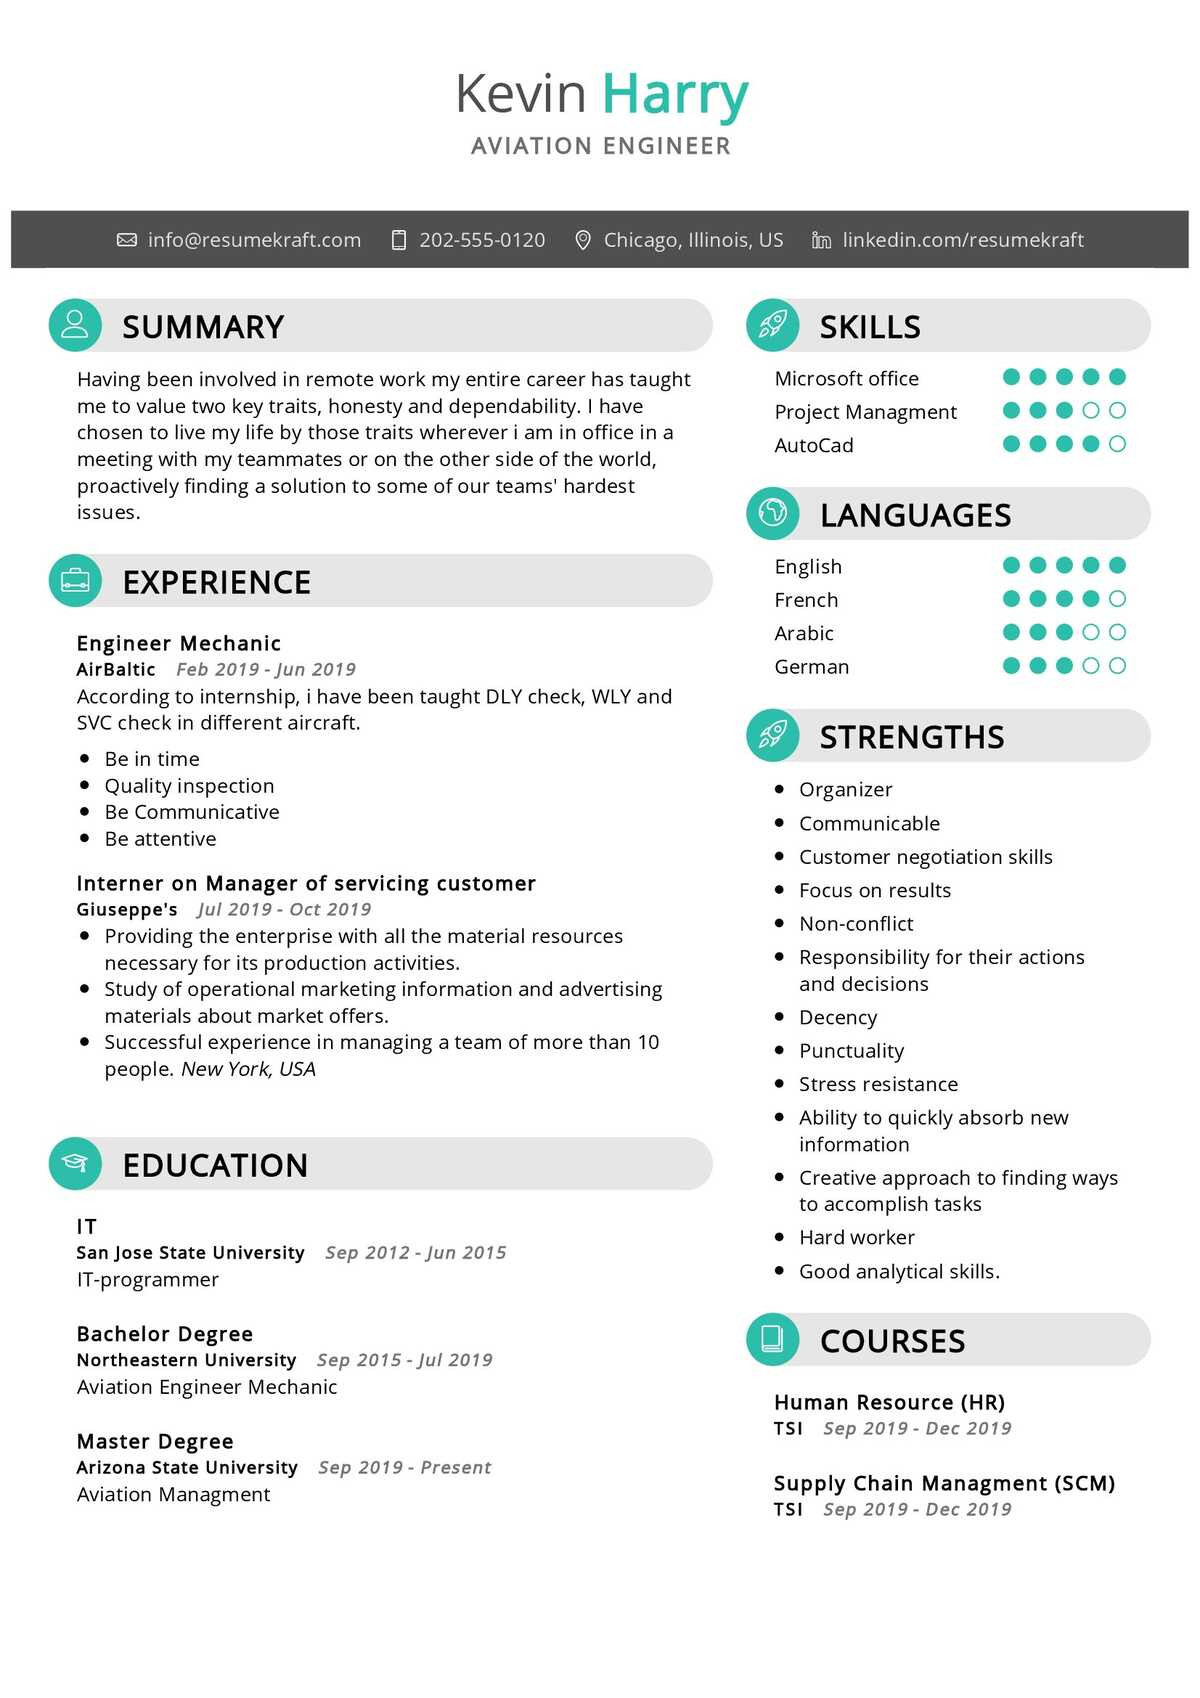 Resume Template Sample for Aviation Engineer Aviation Engineer Resume 2022 Writing Tips – Resumekraft